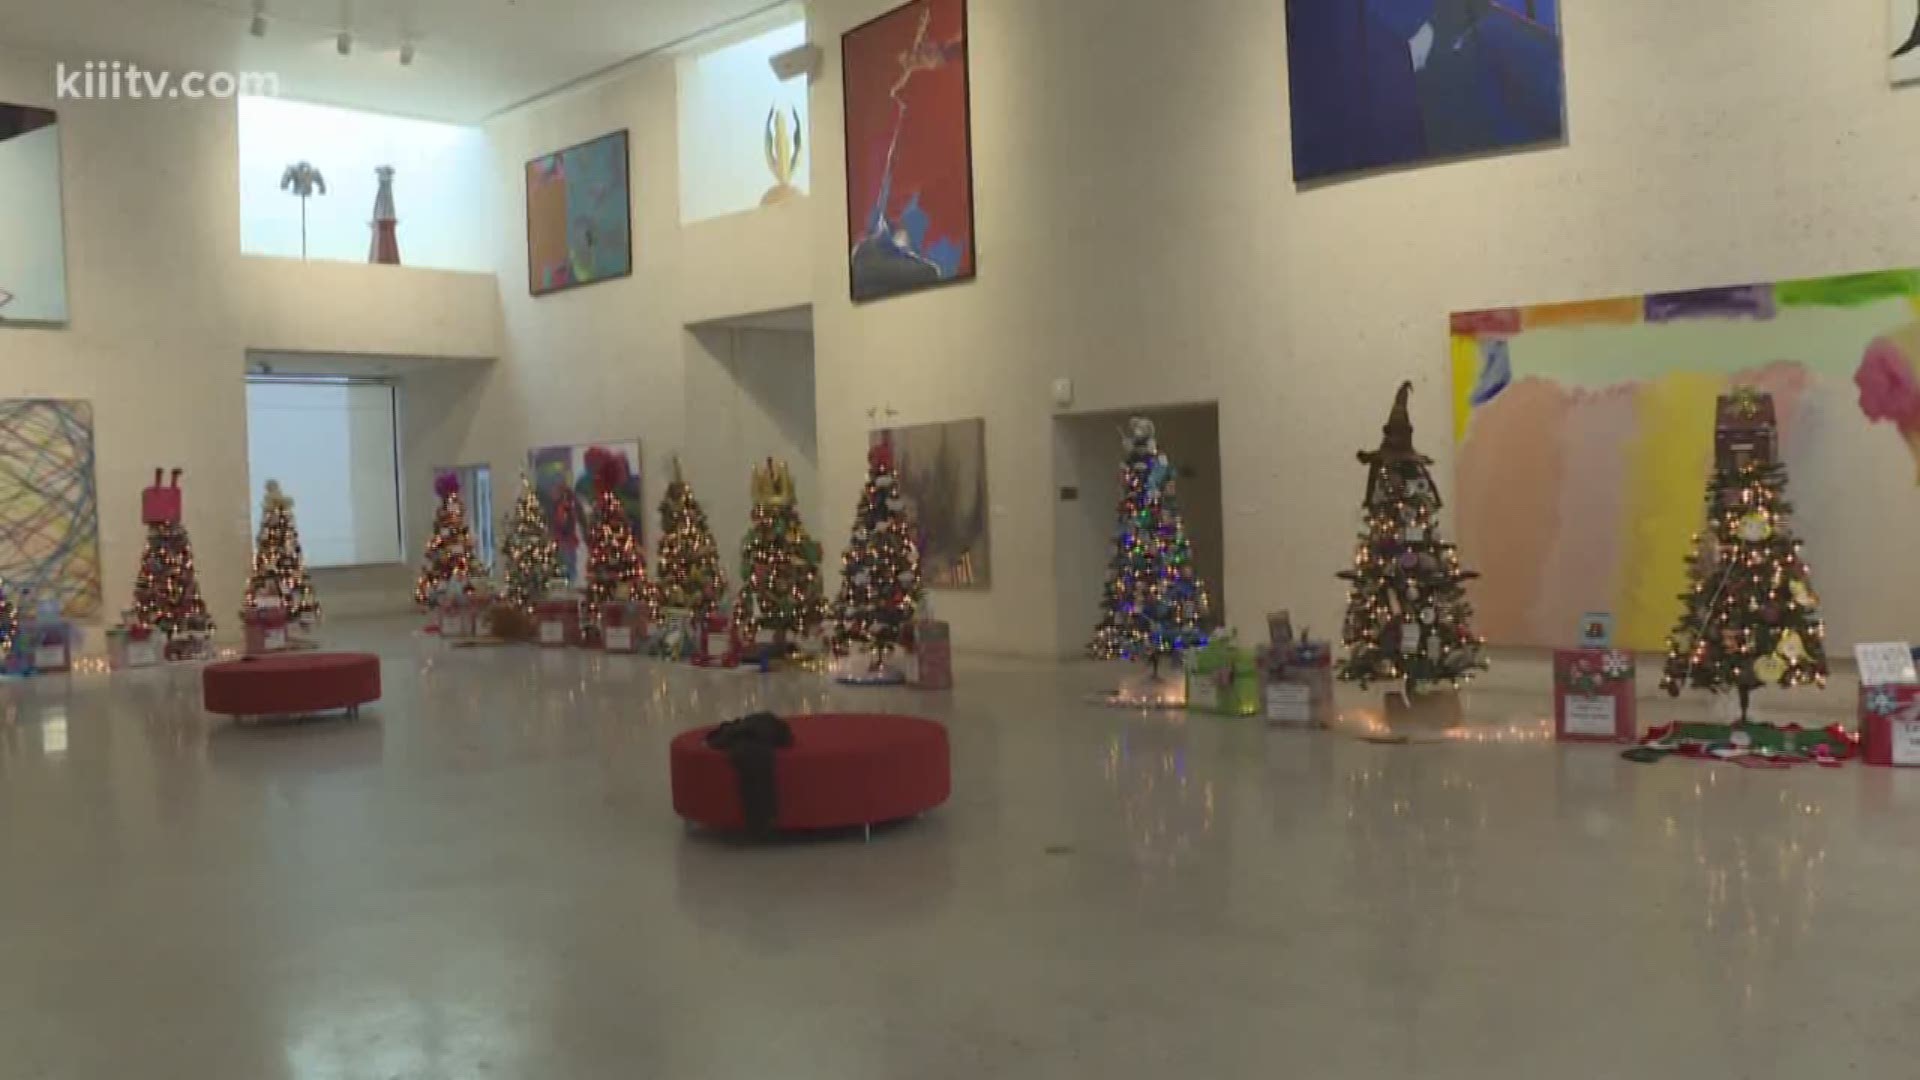 The ninth annual Christmas Tree Forest is now open at the Art Museum of South Texas.